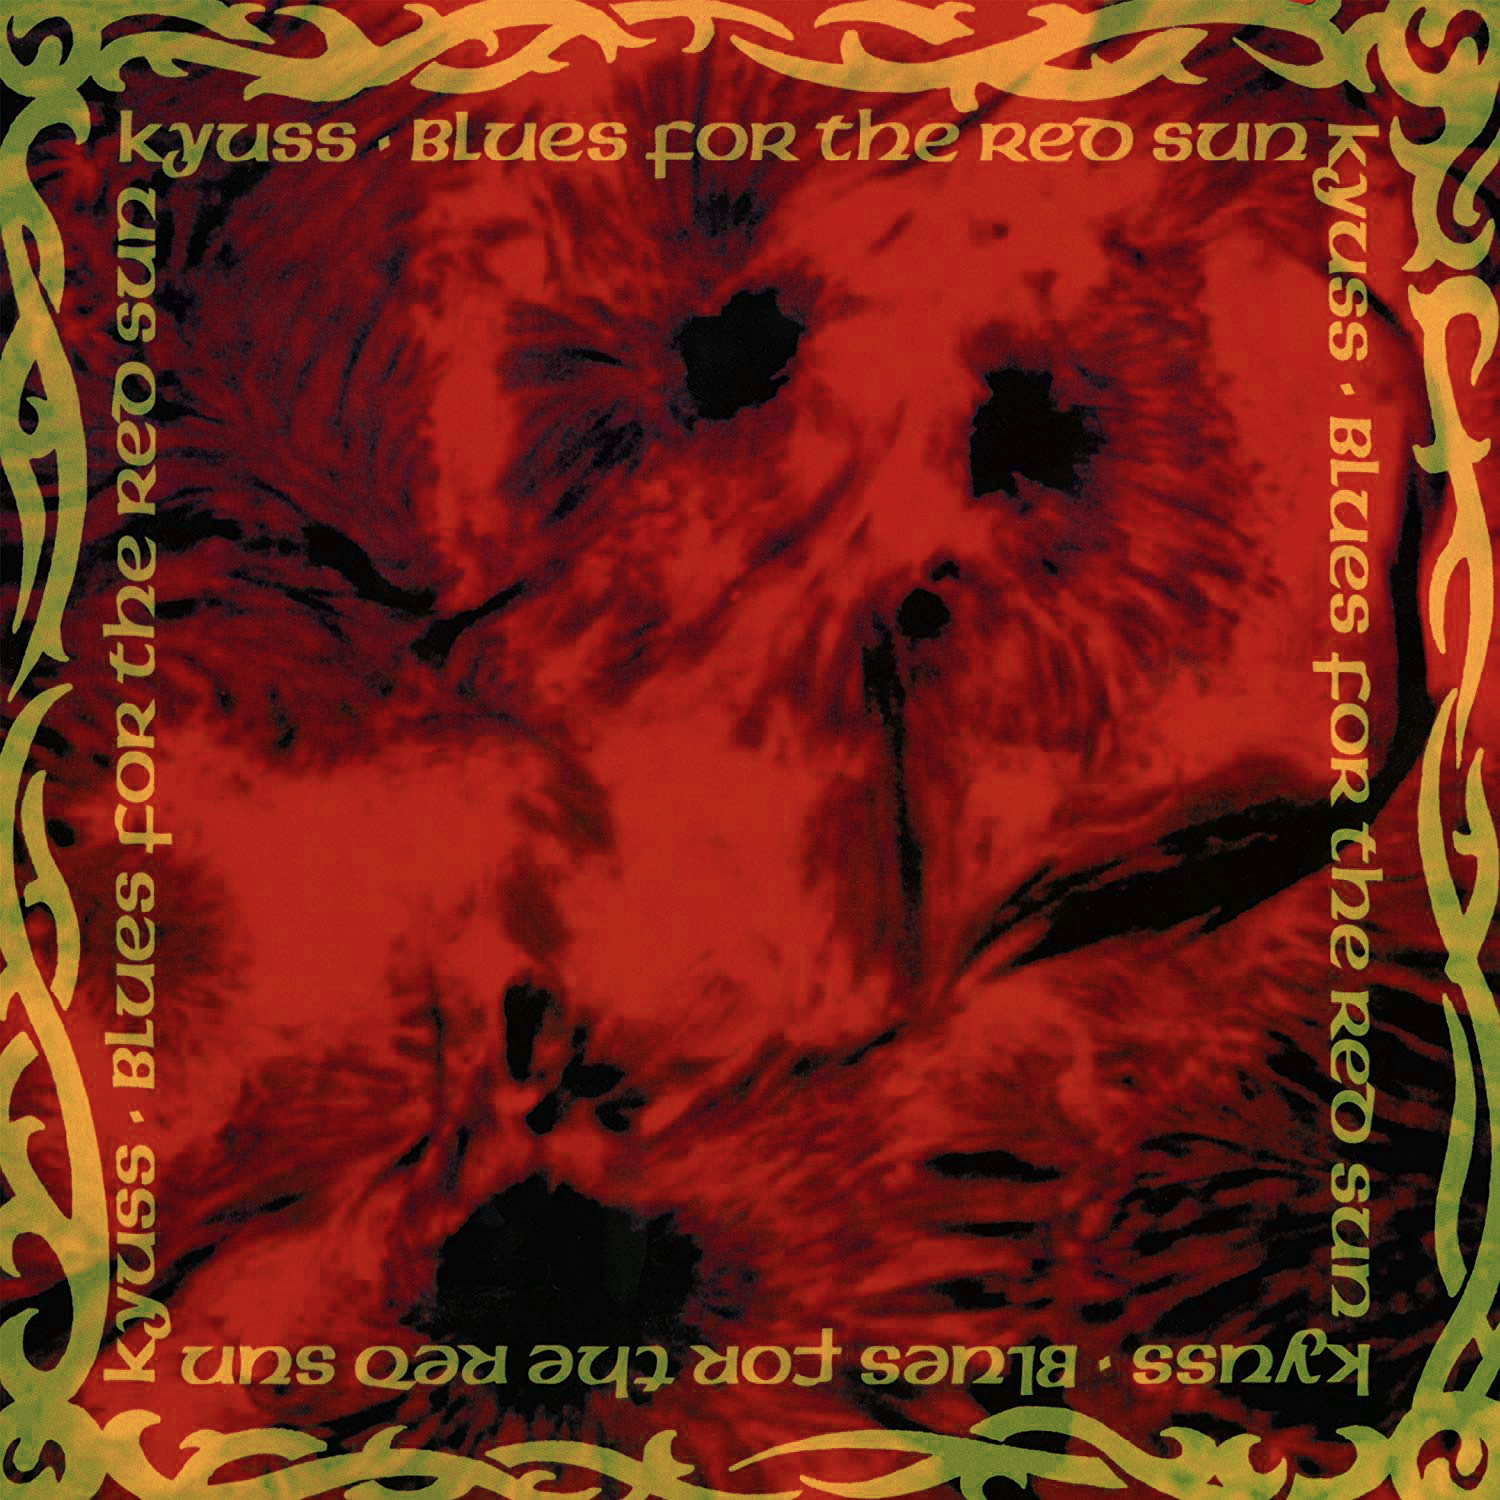 Kyuss-Blues For The Red Sun-CD-FLAC-1992-ERP INT